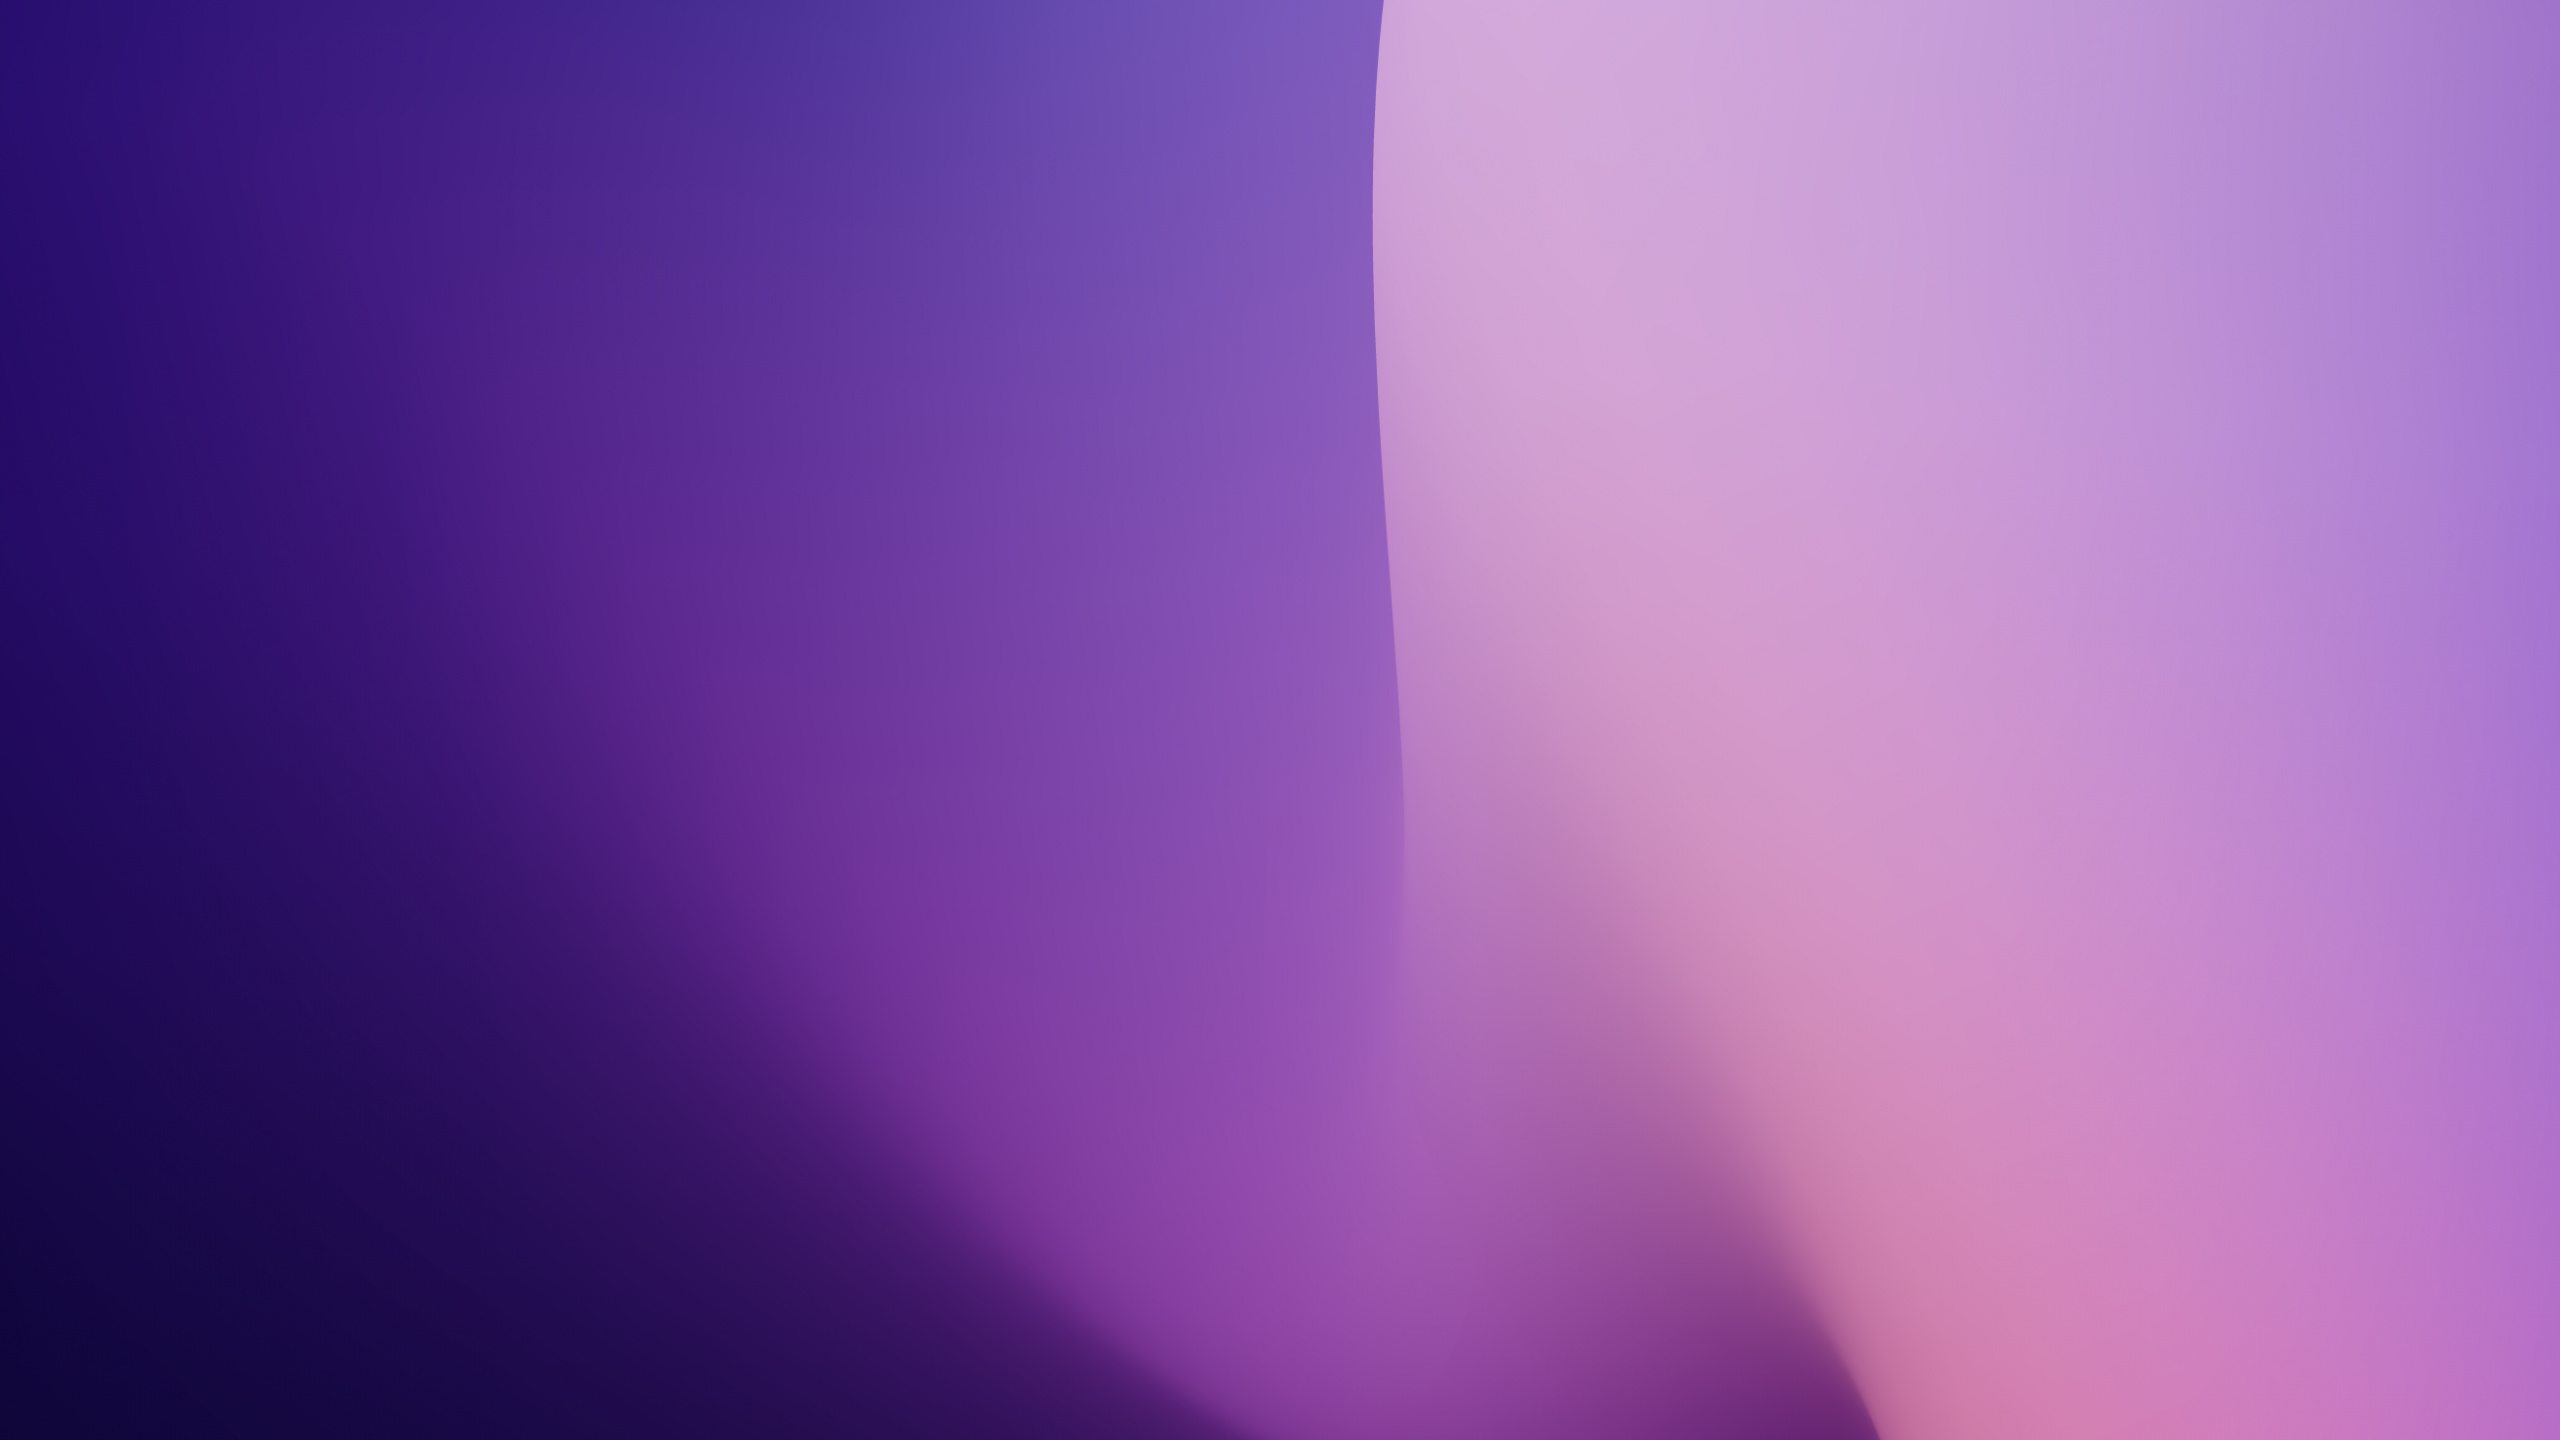 Apples, Smartphone, Colorfulness, Purple, Violet. Wallpaper in 2560x1440 Resolution